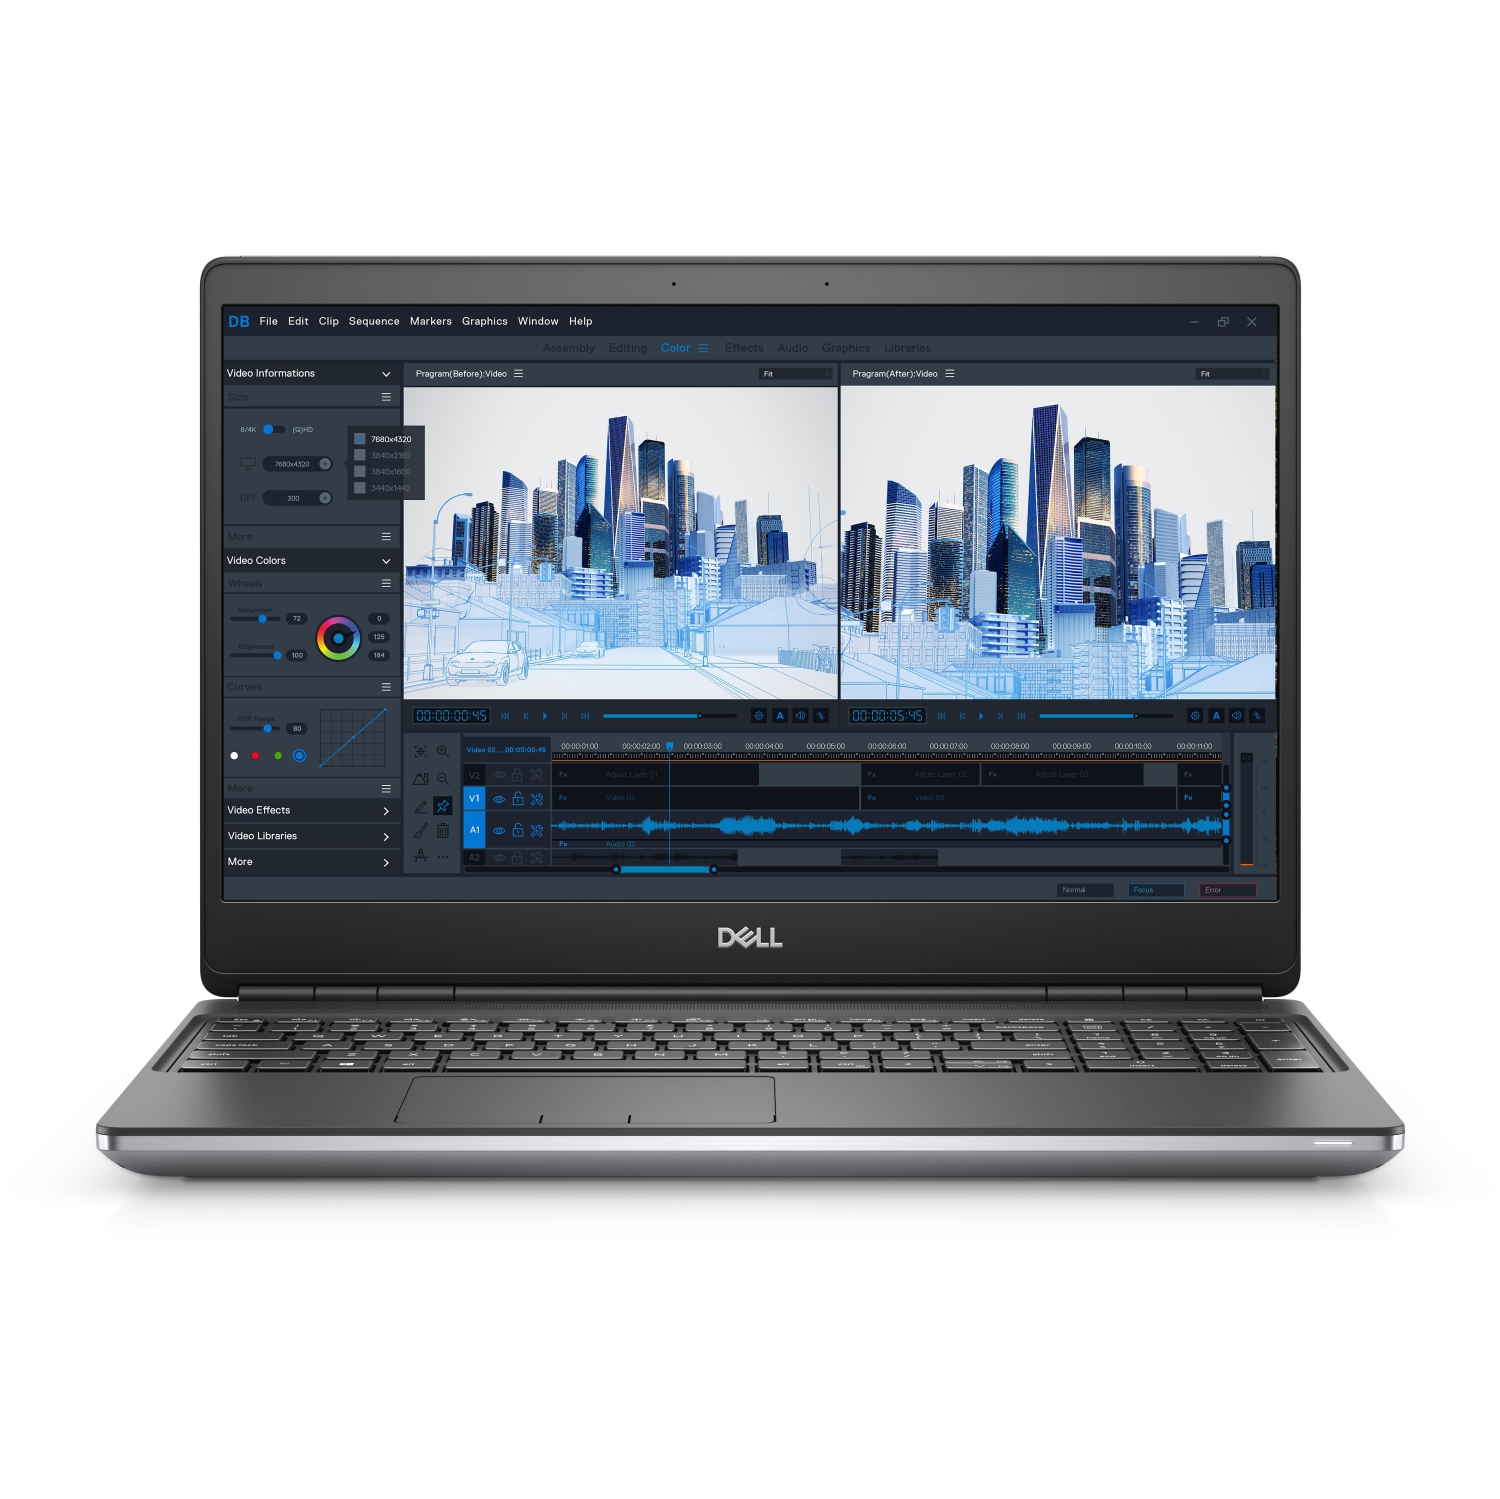 Refurbished (Excellent) - Dell Precision 7000 7560 Workstation Laptop (2021), 15.6" FHD, Core i7, 512GB SSD, 32GB RAM, RTX A2000, 4.6 GHz, 11th Gen CPU Certified